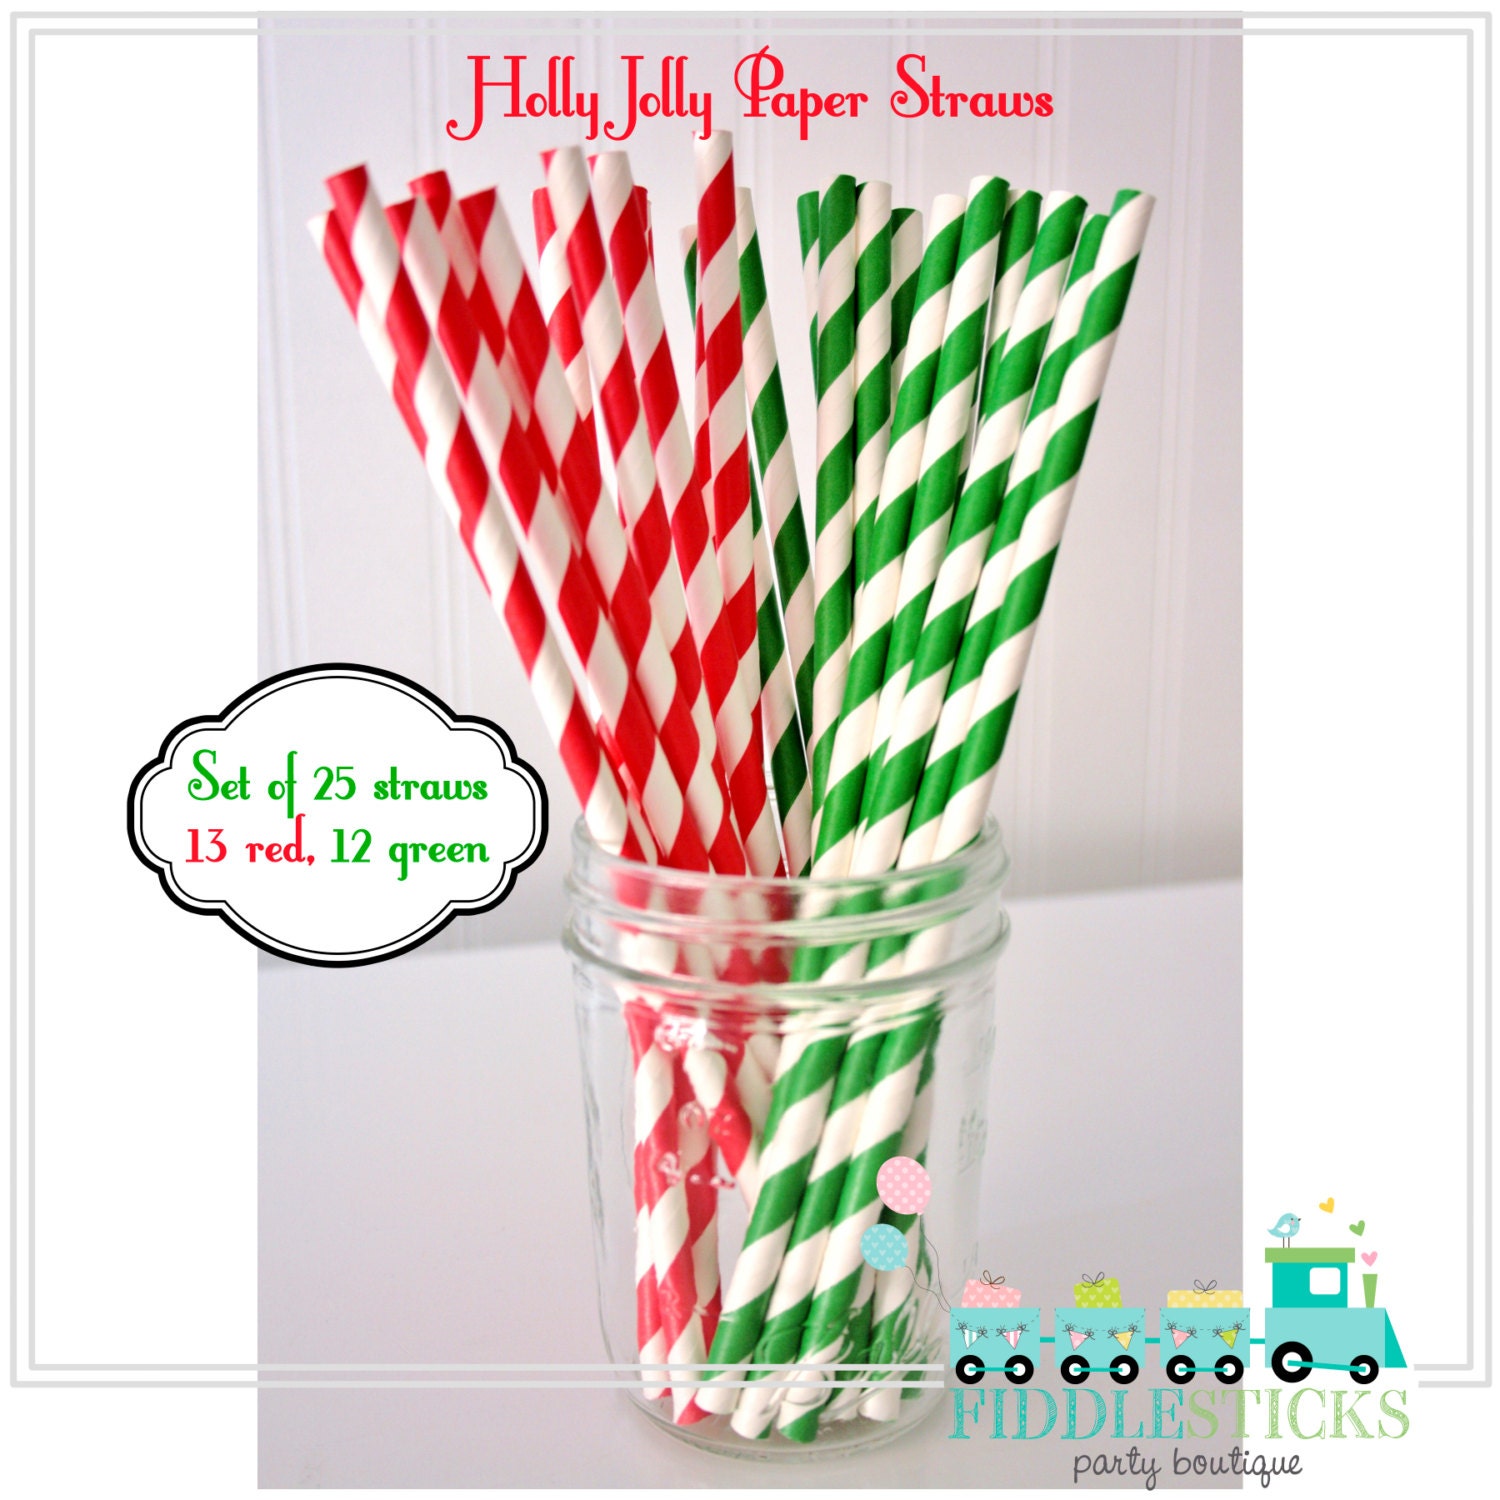 25 Striped Paper Straws, Holly Jolly, Party Straws, Party Favors, Red Straws, Green Straws - FiddleSticksBoutique